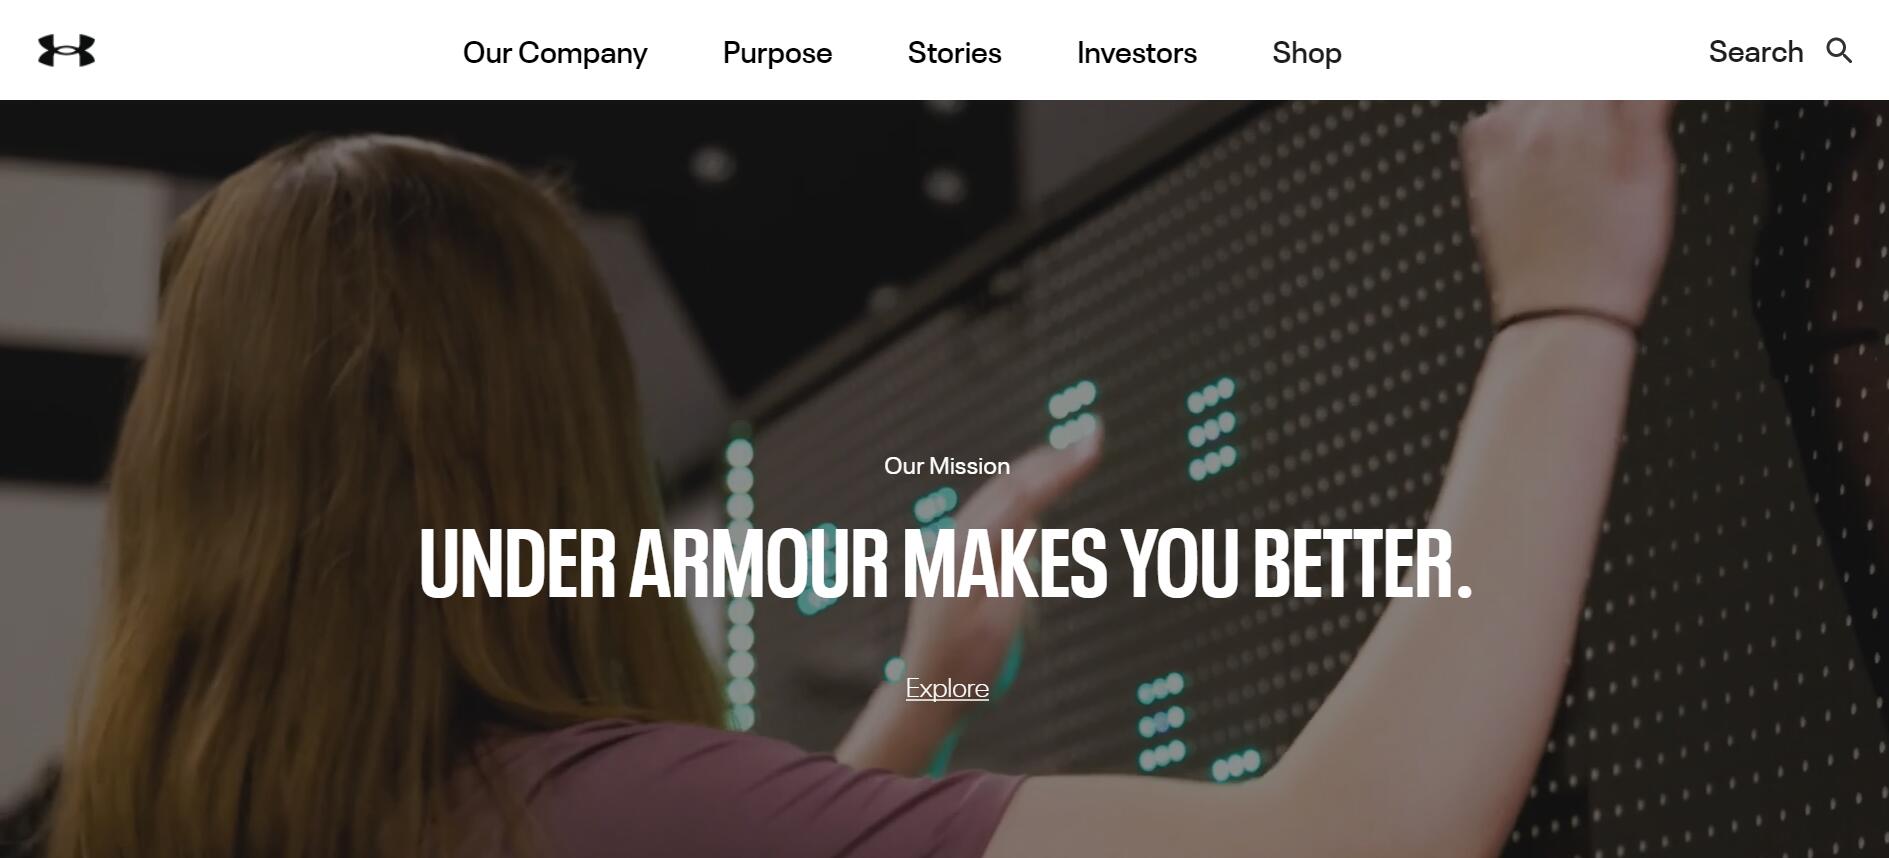 Under Armour Topped Expectations with $1.58 Billion Revenue in Q3 and Plans to Ramp up E-commerce with the New CEO